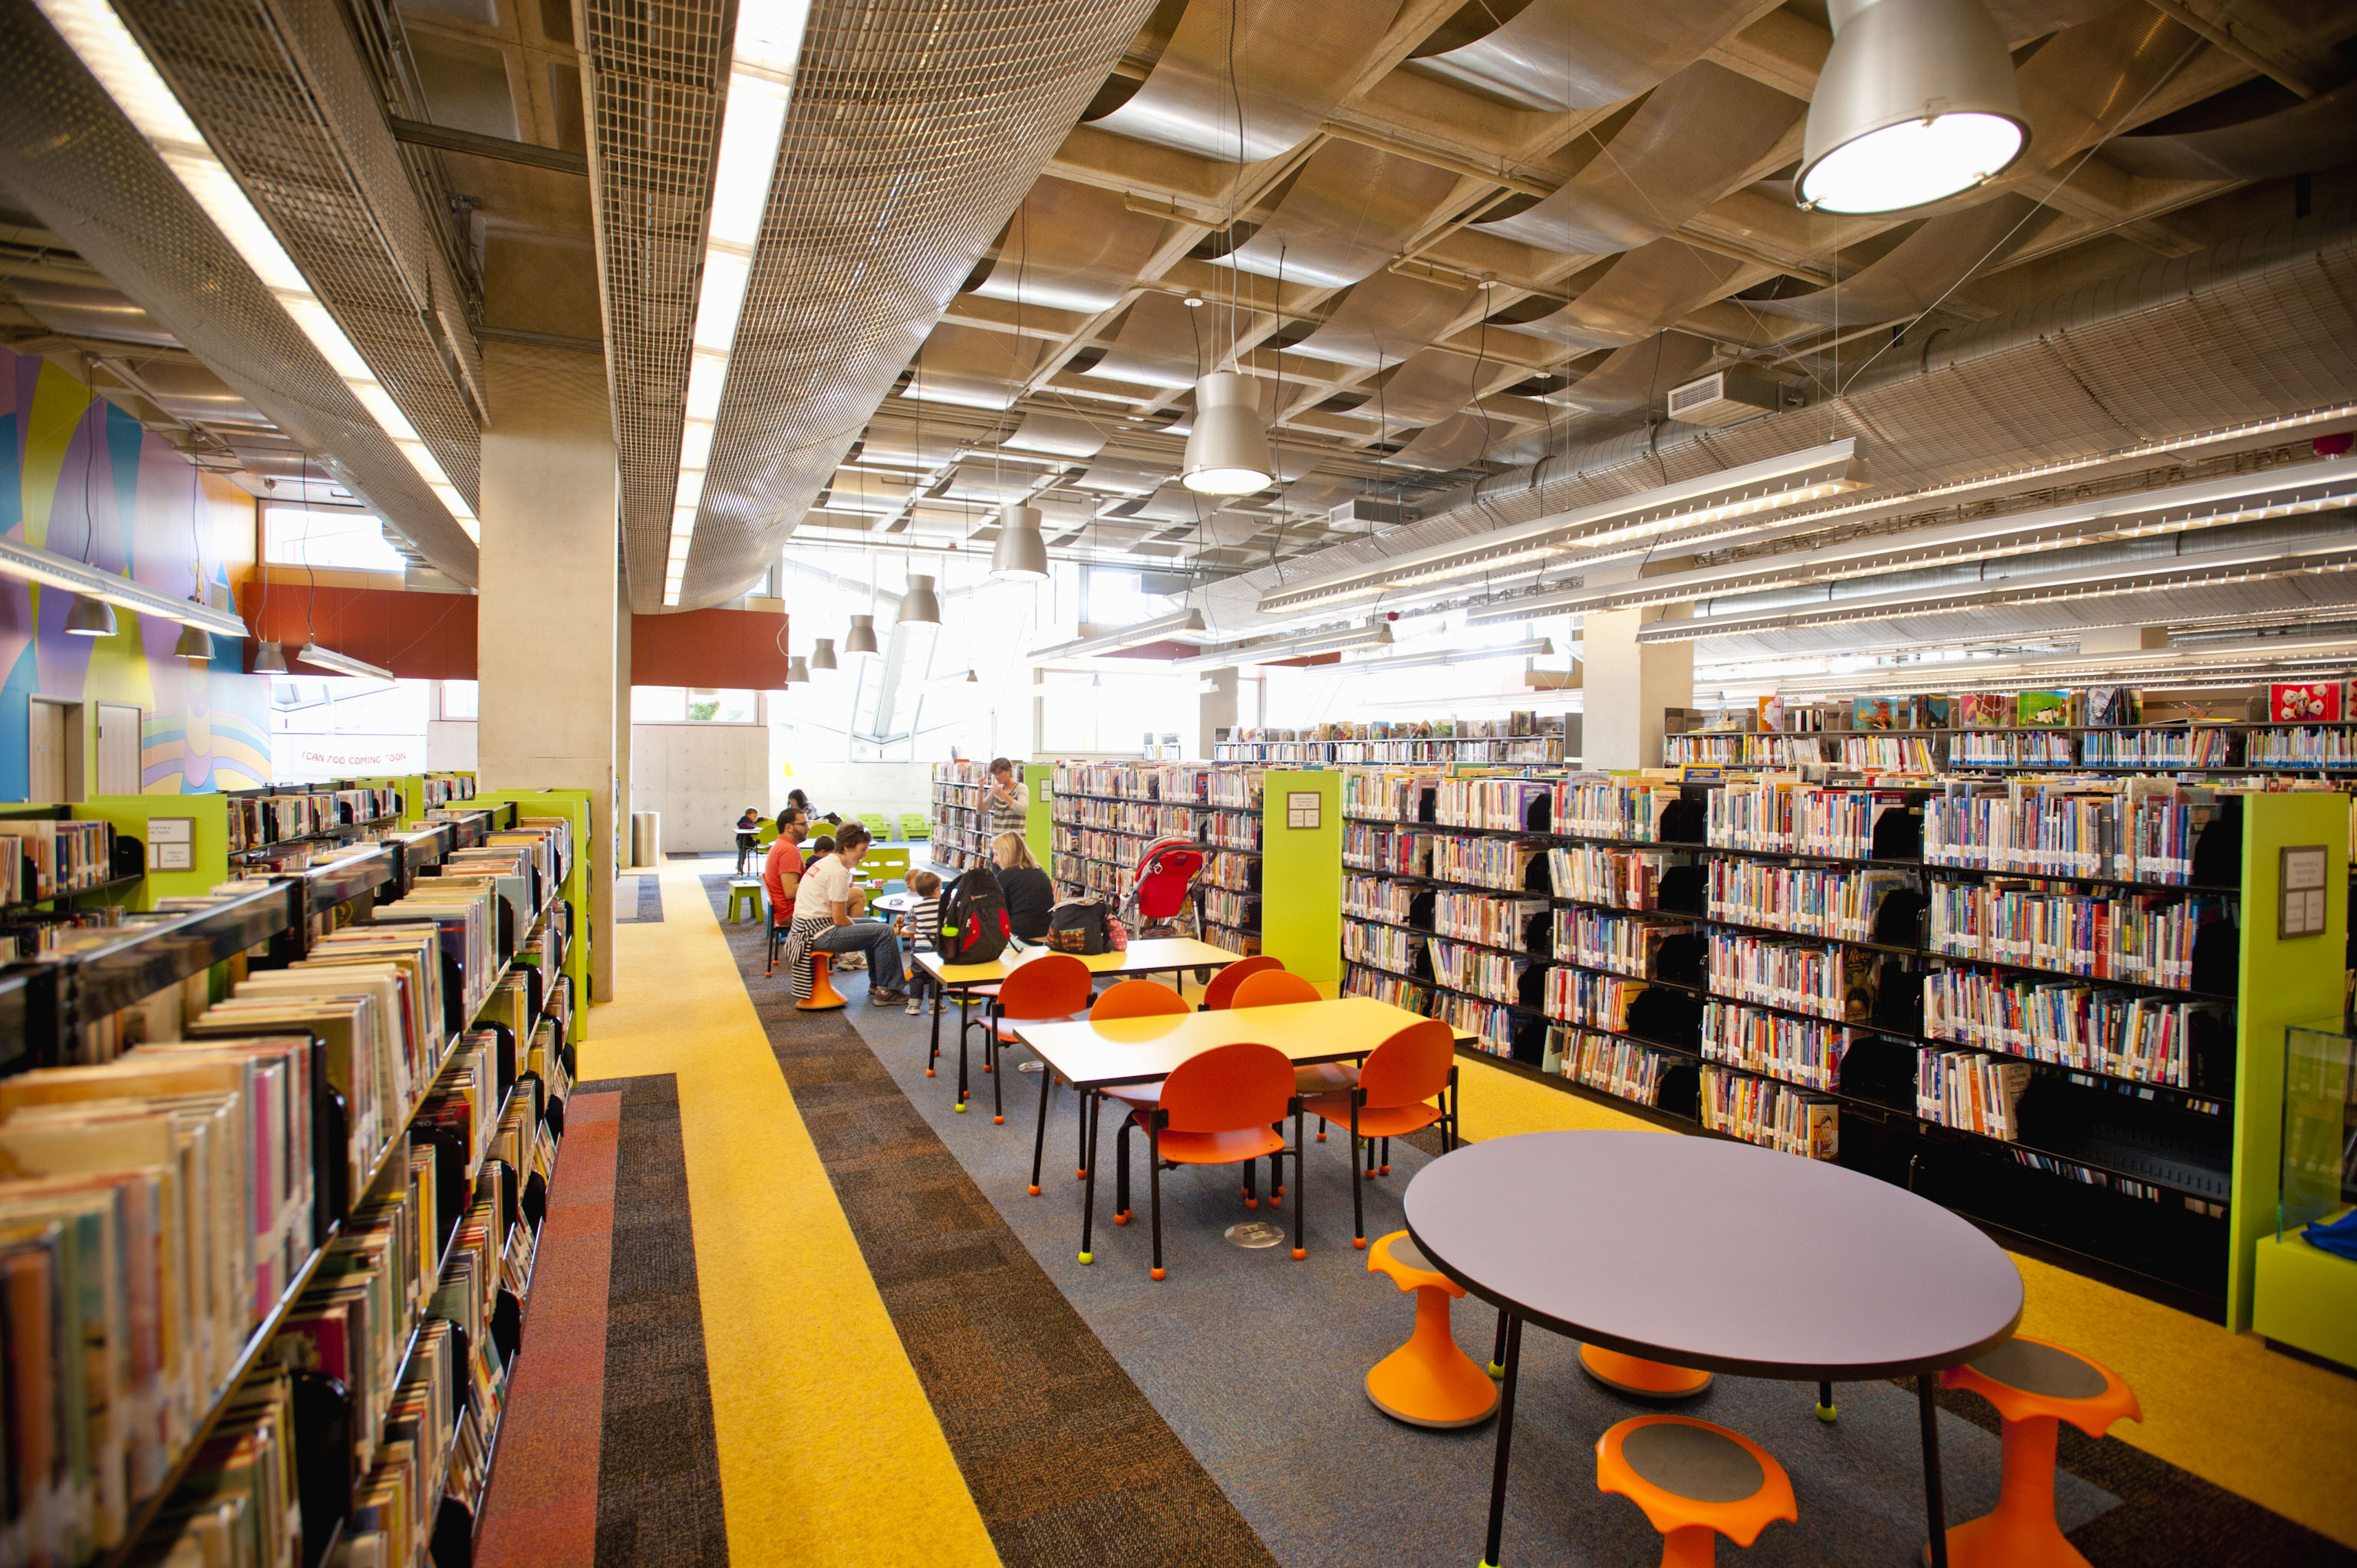 Photo of the Children's Library